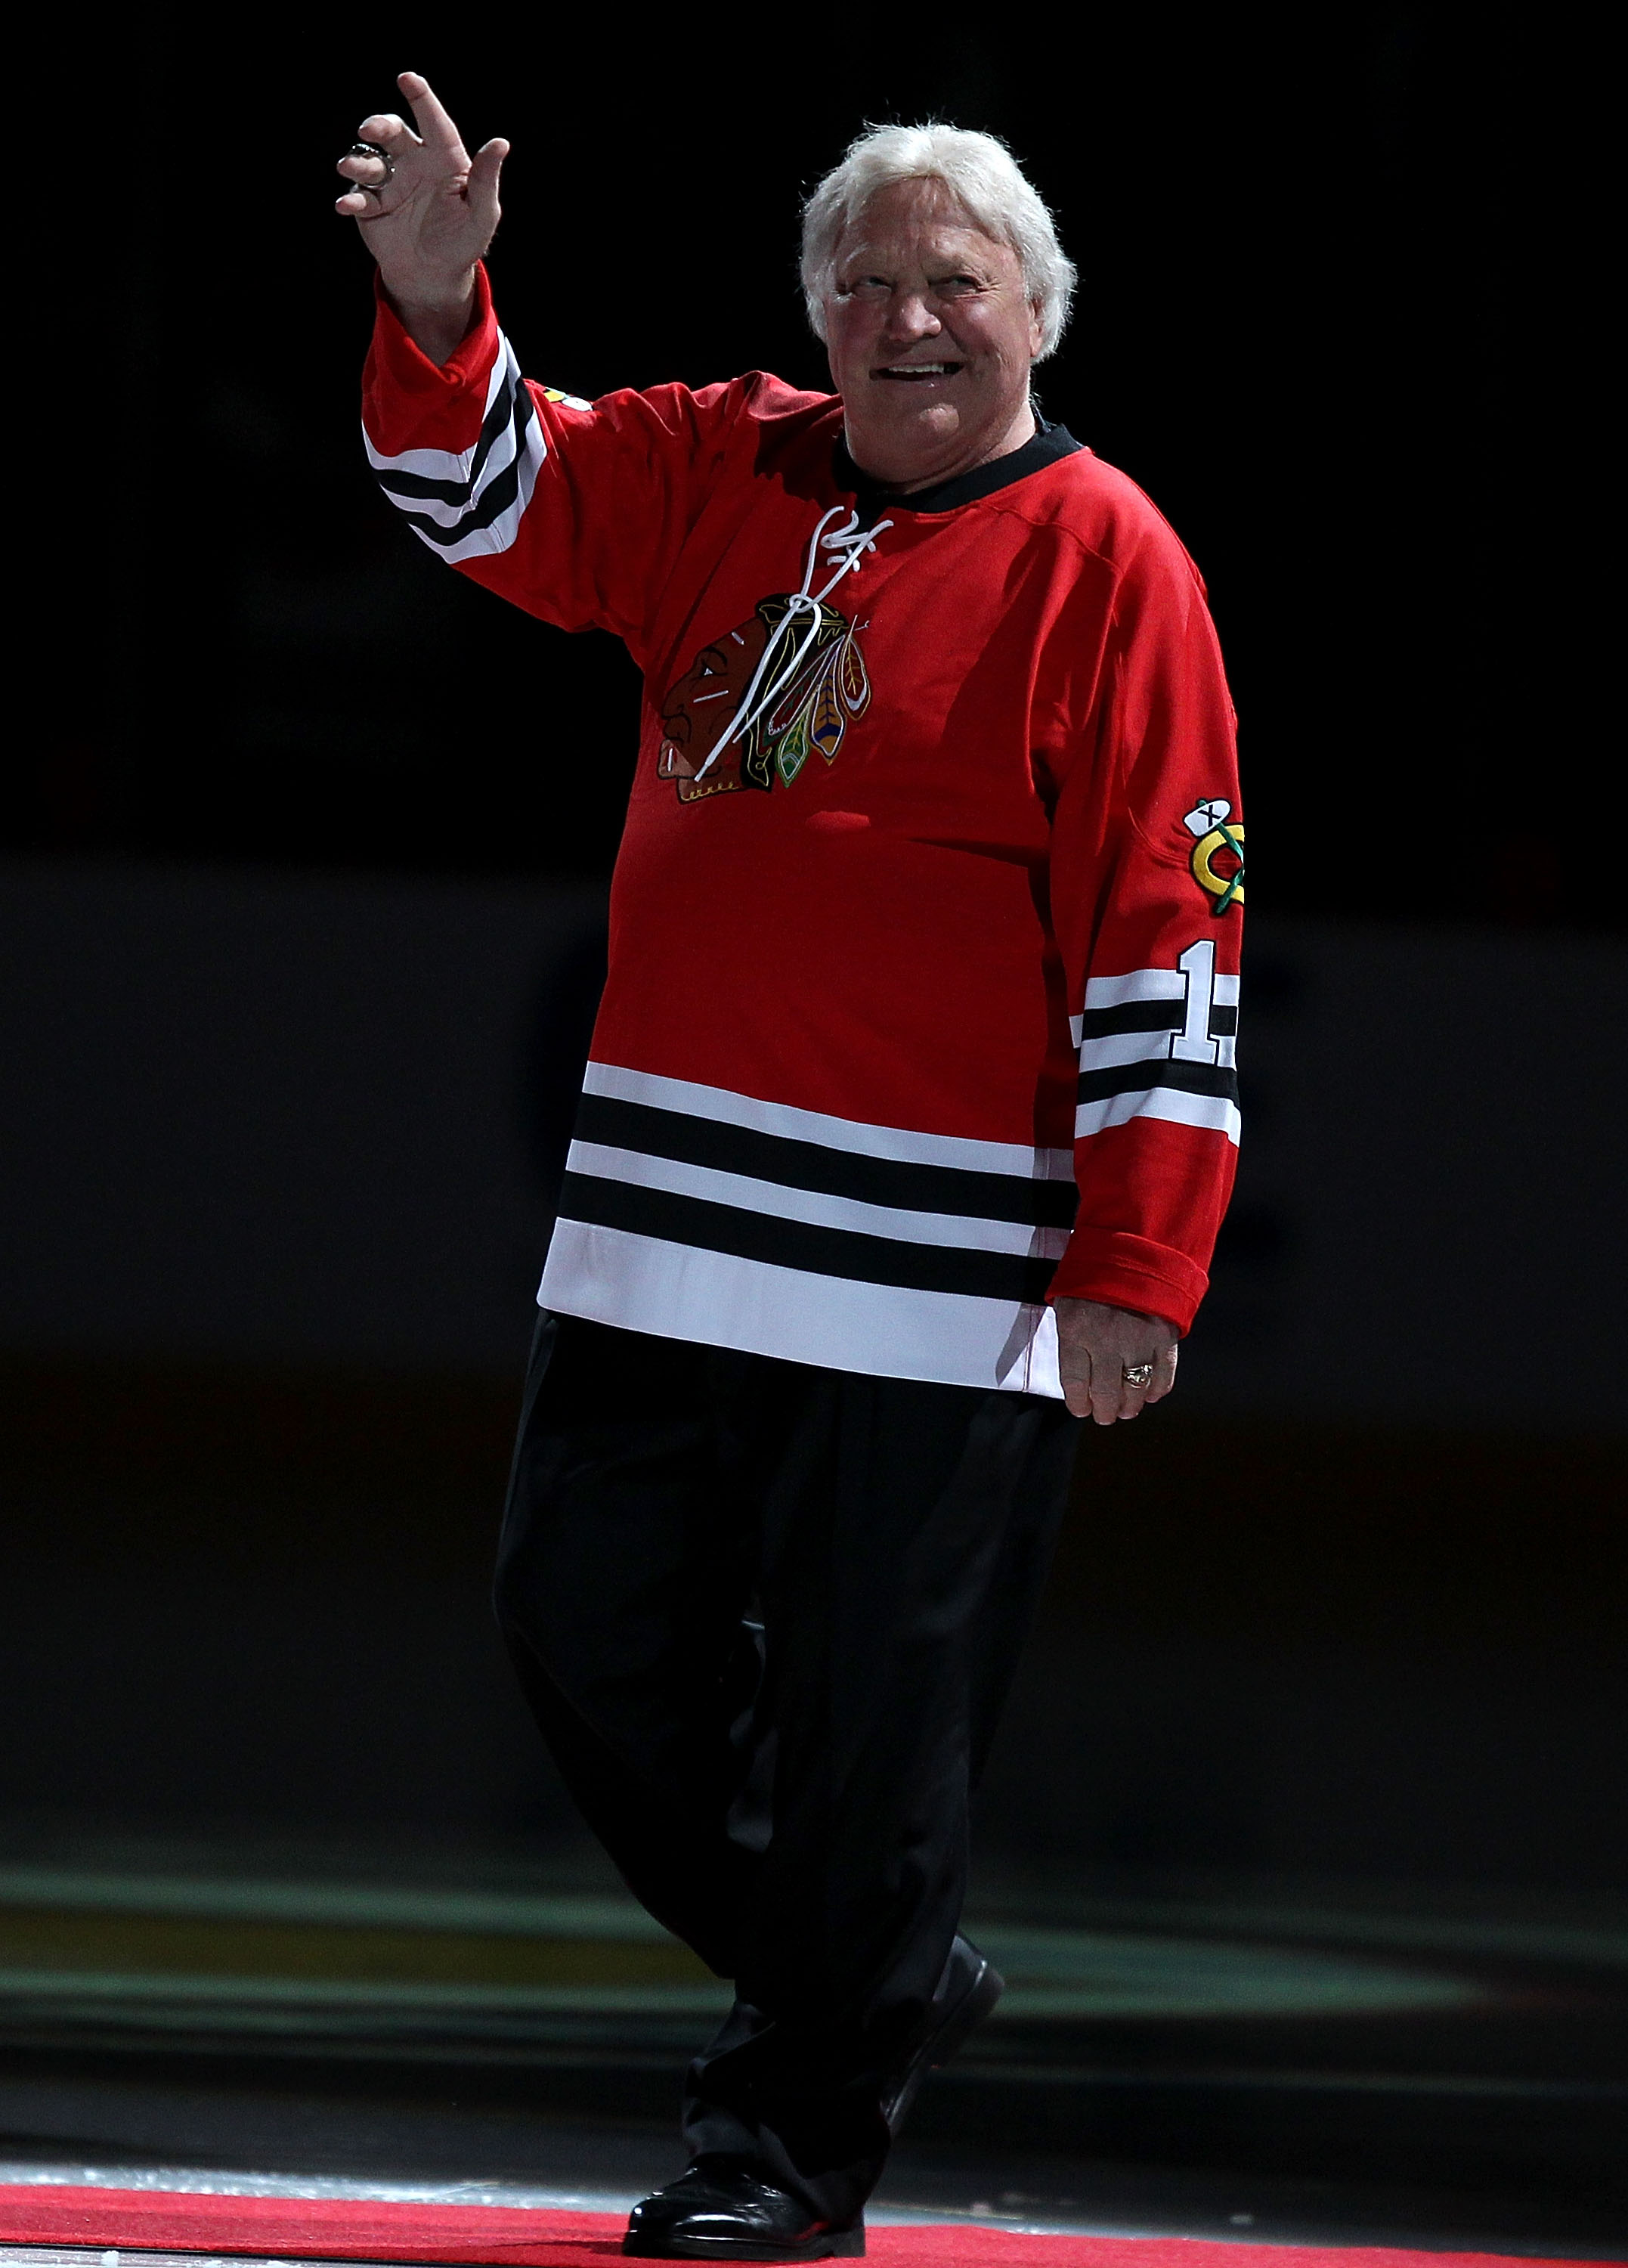 CHICAGO, IL - JANUARY 09: Former player Bobby Hull of the Chicago Blackhawks is introduced to the crowd during a Heritage Night to honor the 1961 Stanley Cup Championship team before a game against the New York Islanders at the United Center on January 9,